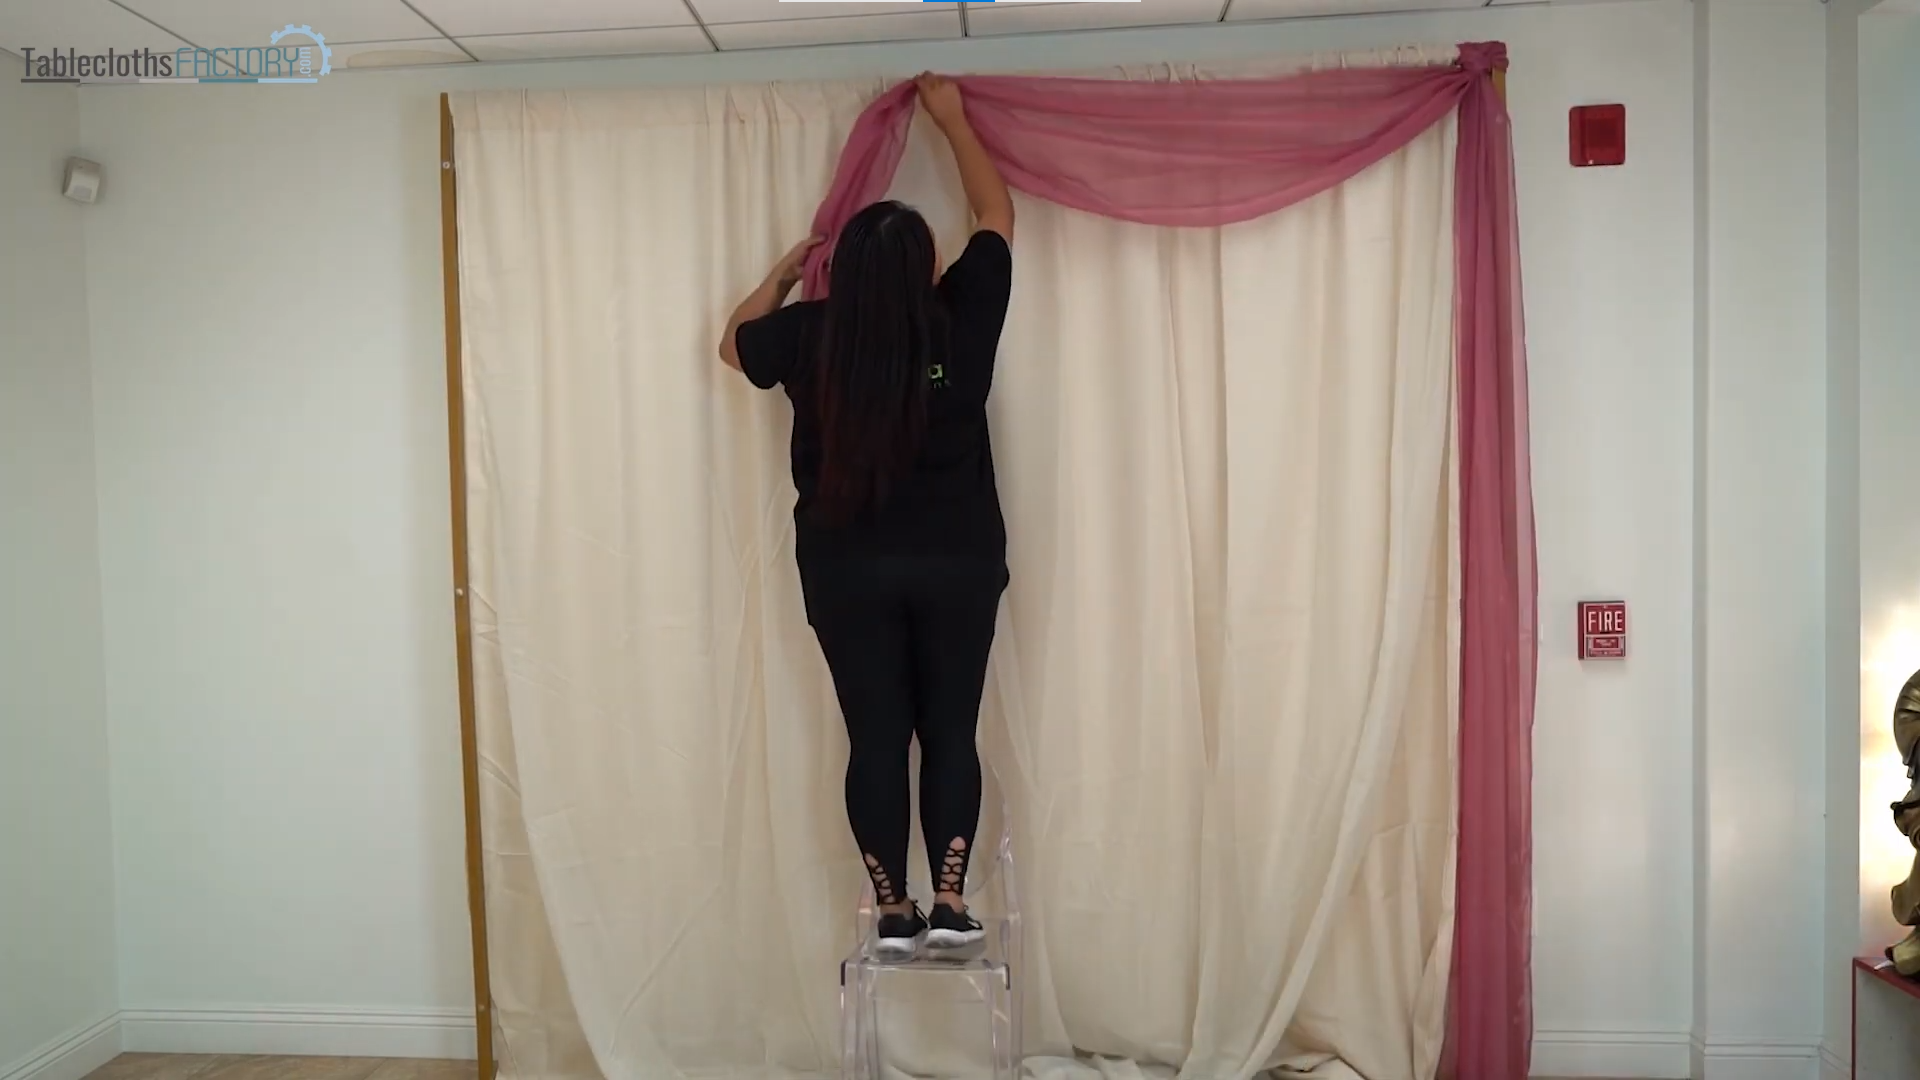 Person assembling the backdrop stand and drape curtains